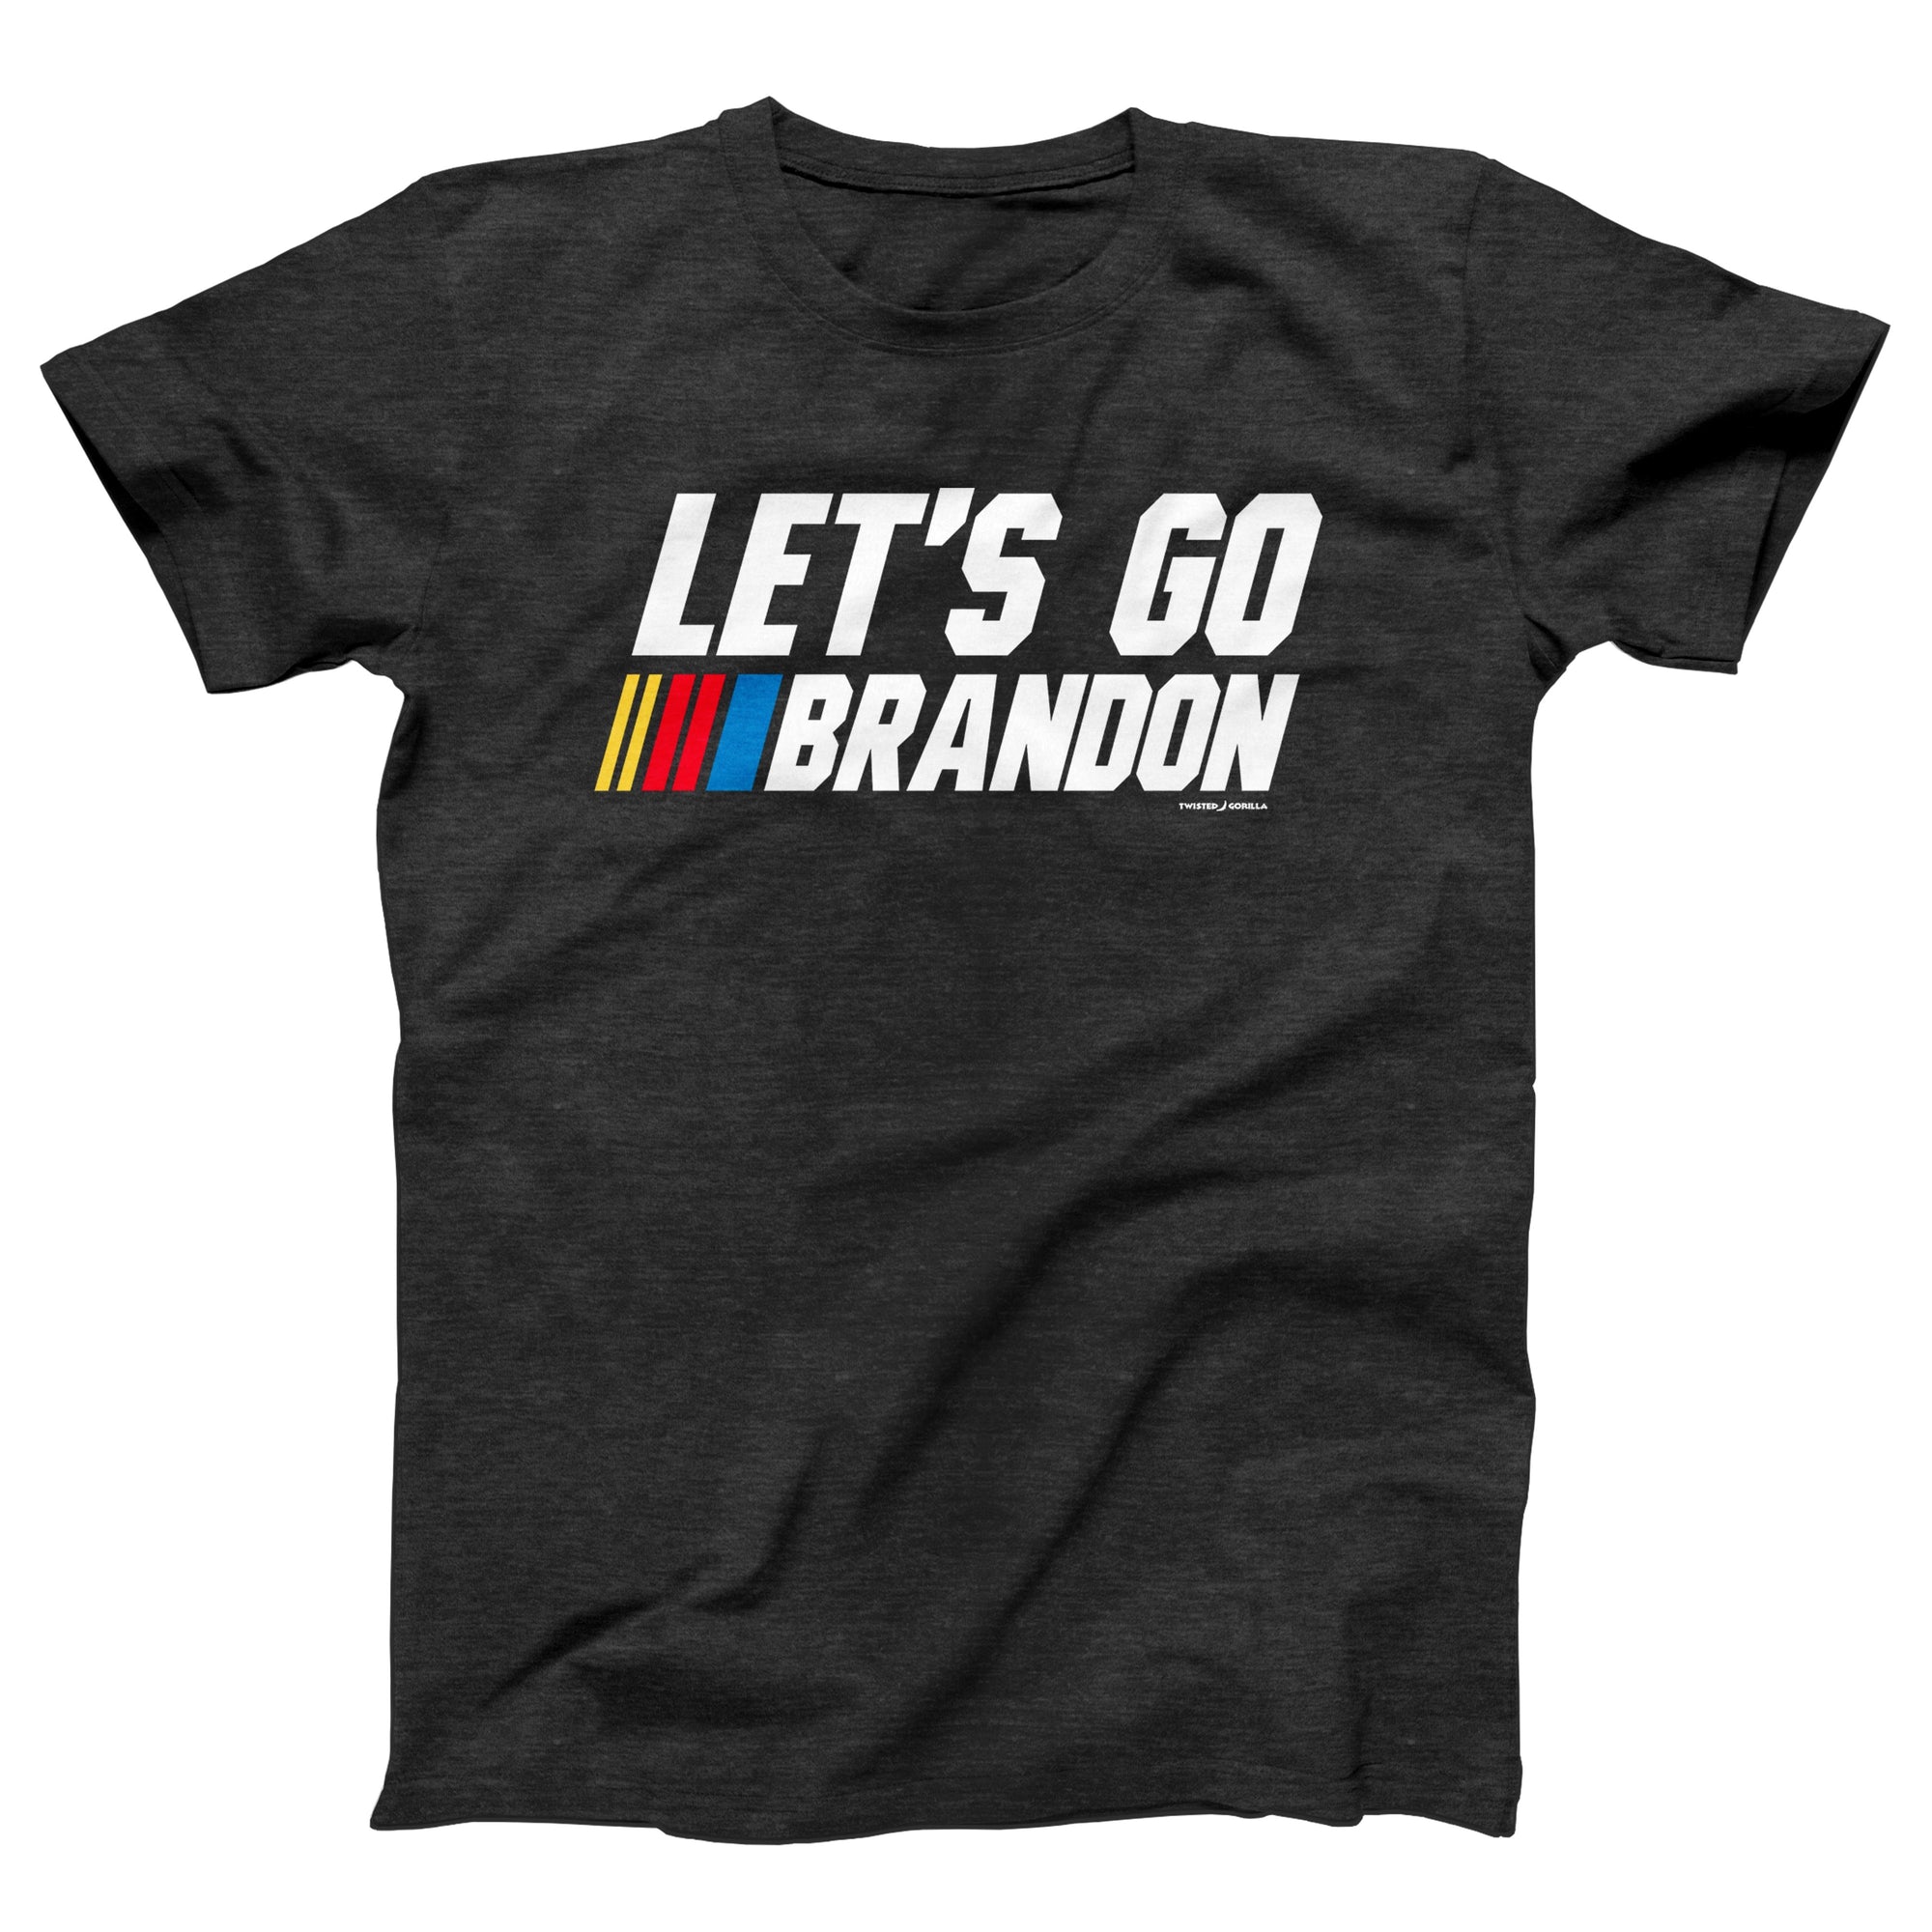 Let's Go Brandon Adult Unisex T-Shirt  Funny and Sarcastic T-Shirts &  Apparel